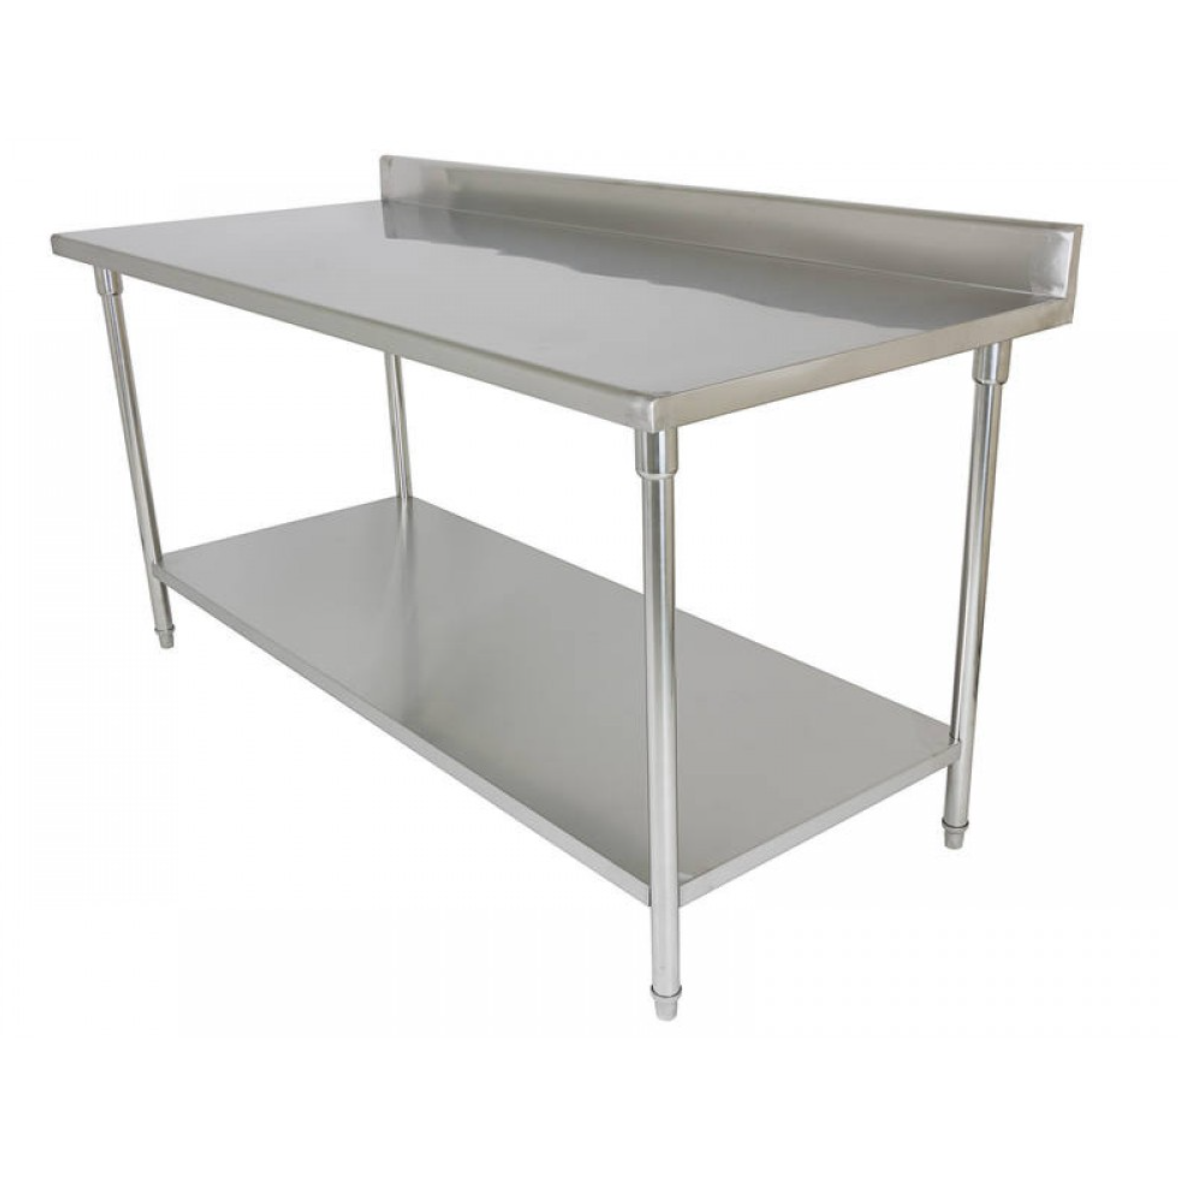 Stainless Steel Catering Bench